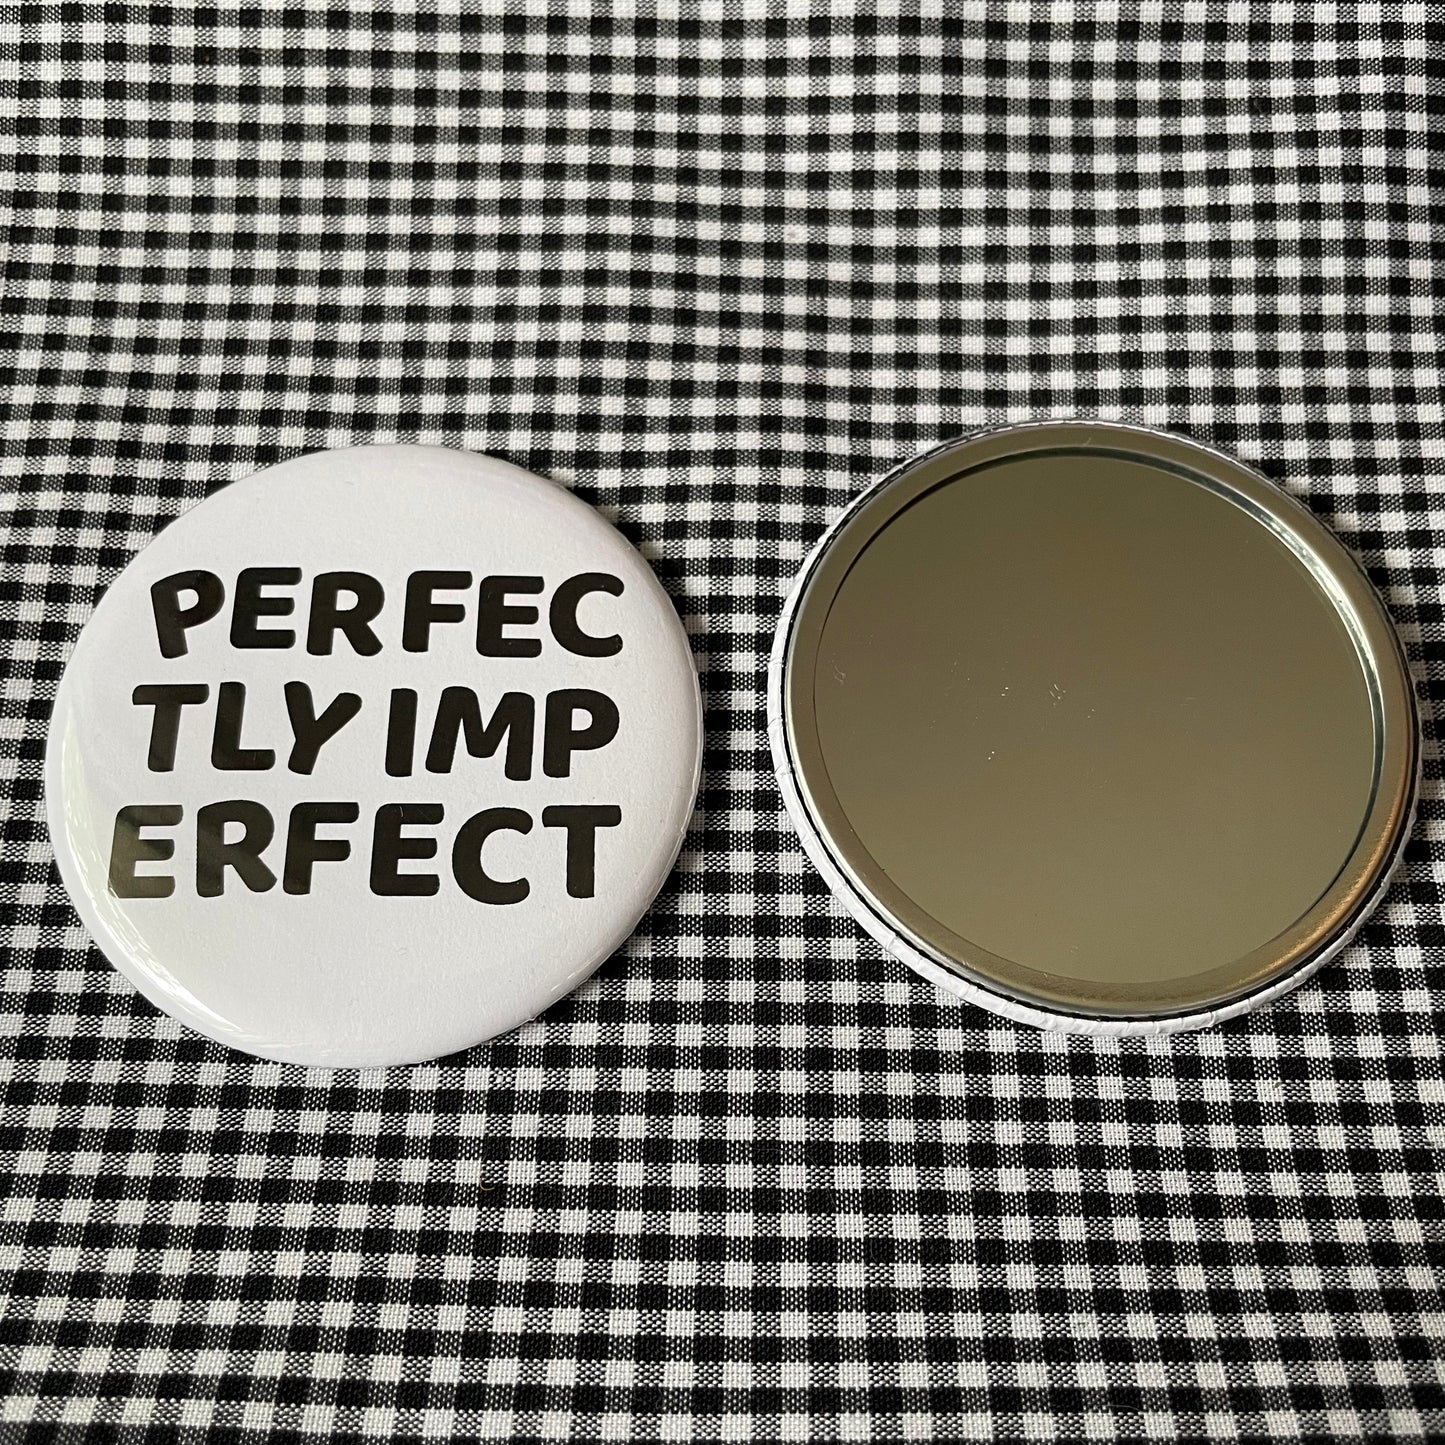 PERFECTLY IMPERFECT PIN / MAGNET / MIRROR  2.25”